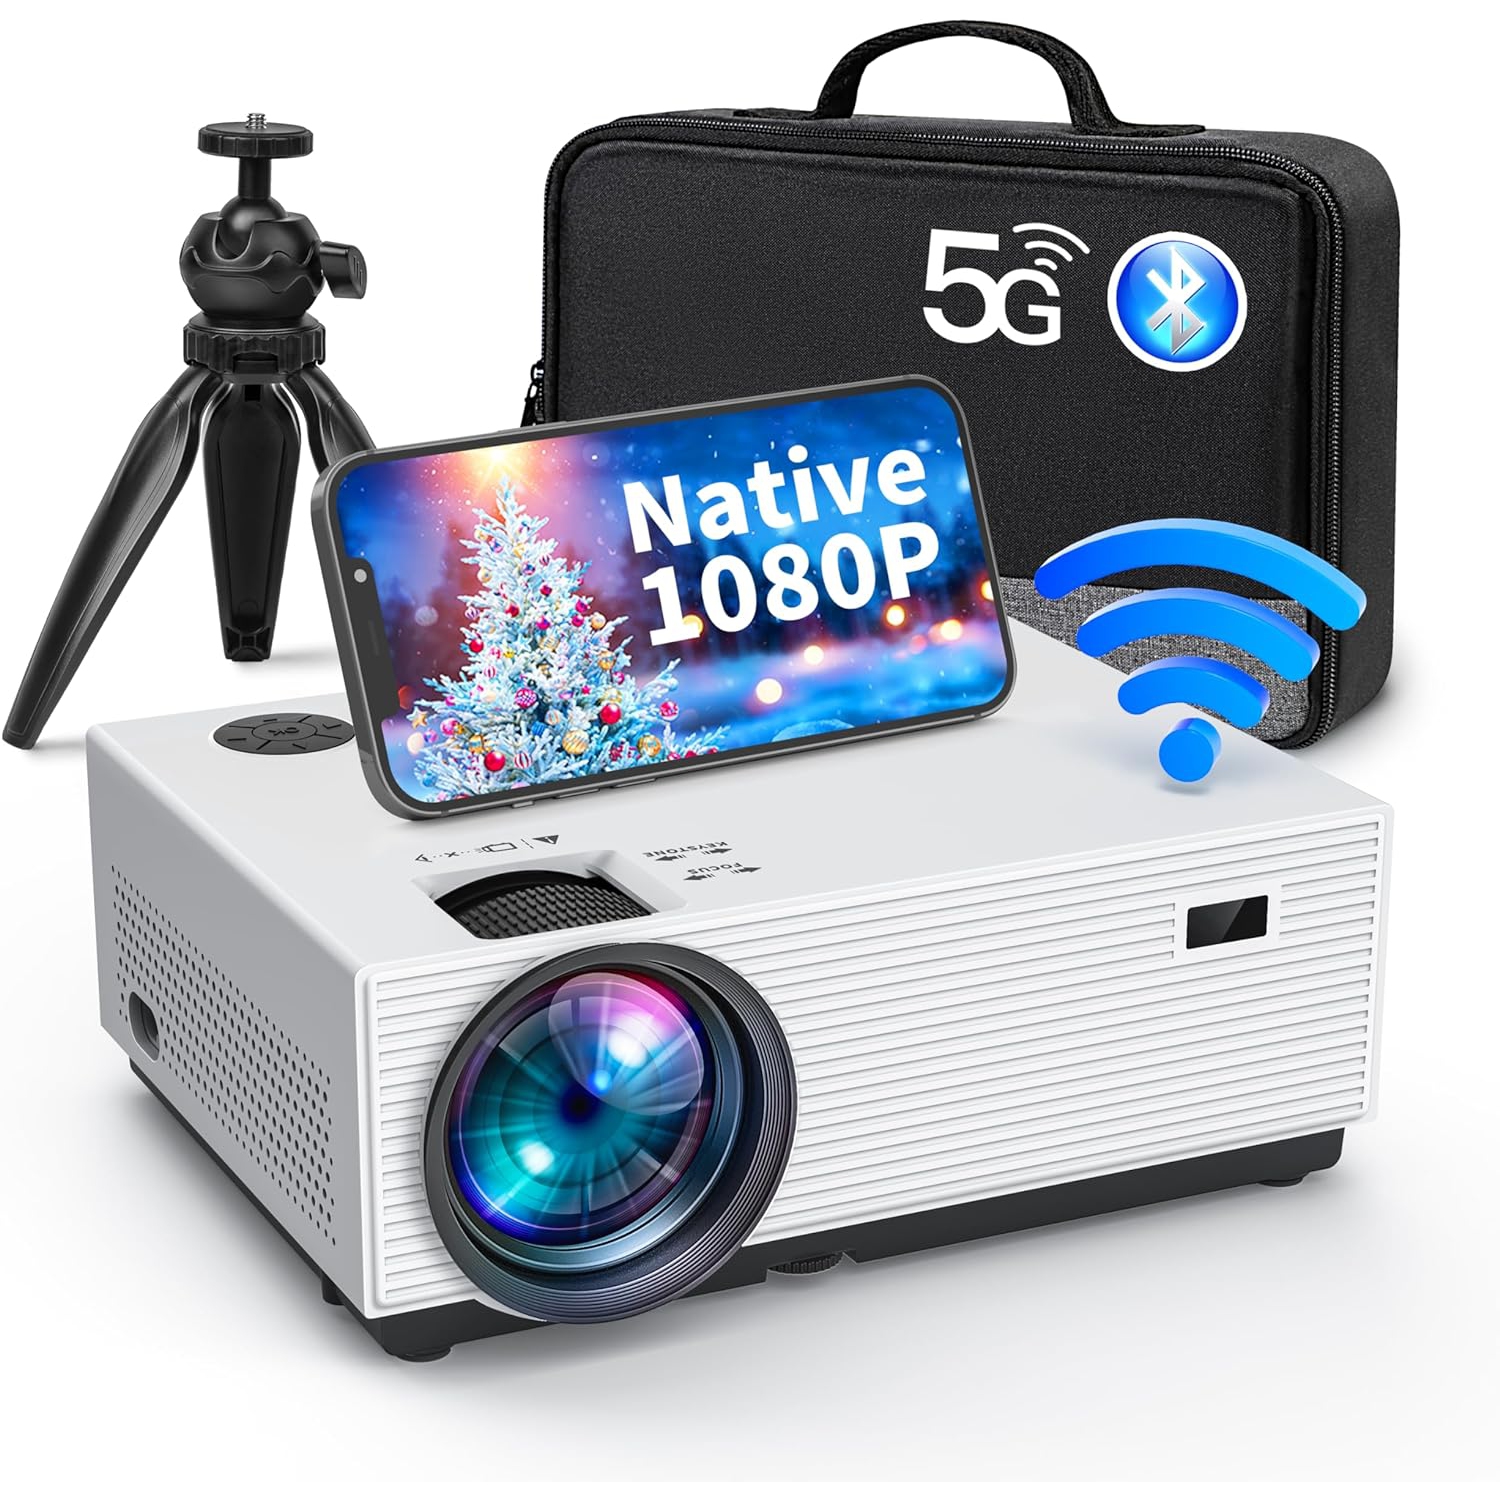 4K Projector with 5G WiFi and Bluetooth, Acrojoy 450 ANSI Native 1080P Mini Projector Support 400" Display, 75% Zoom, Portable Outdoor Movie Projector W/Tripod and Bag